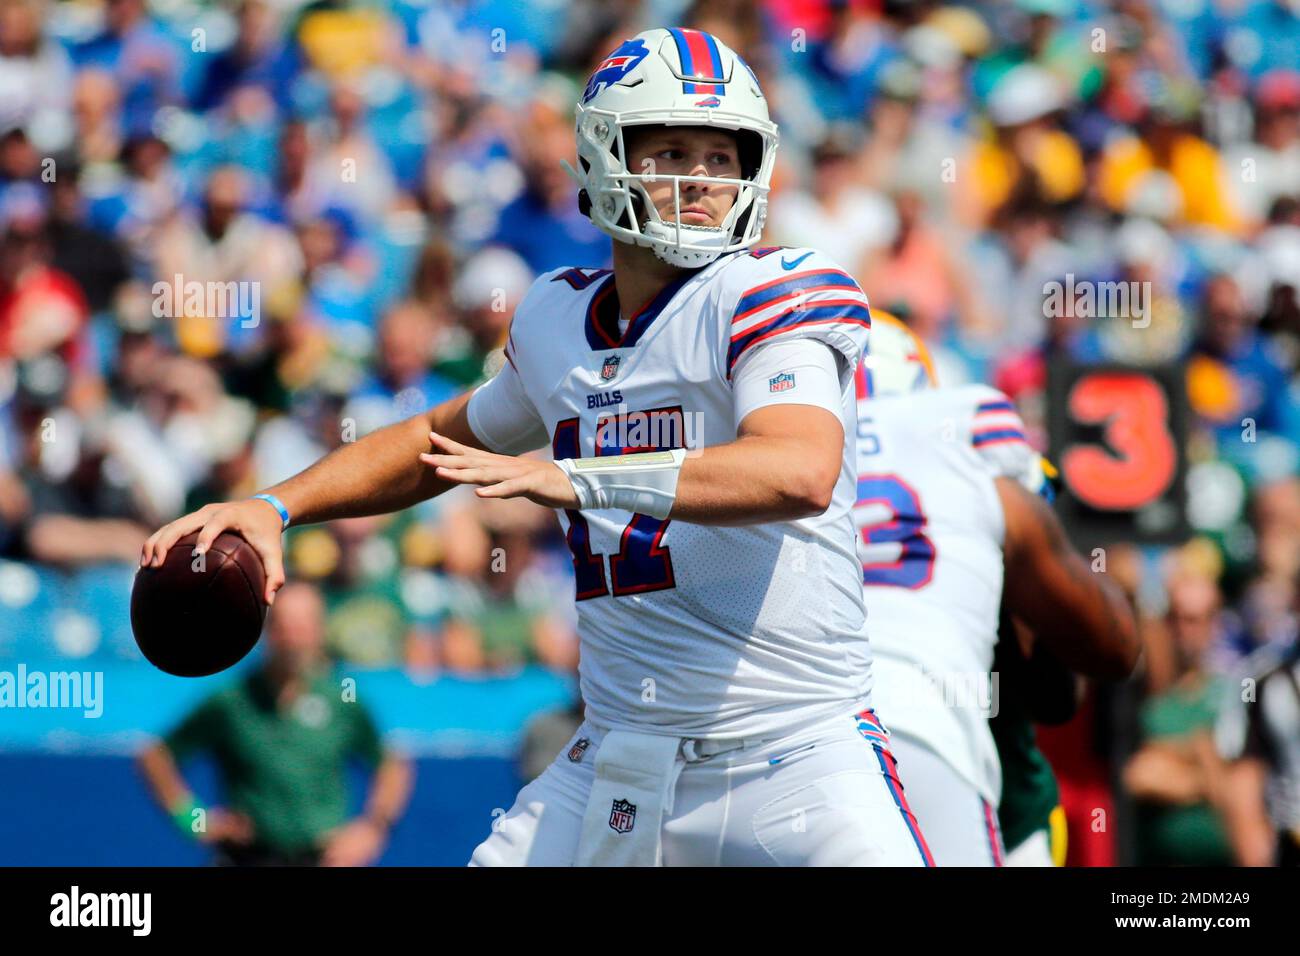 2021 Buffalo Bills schedule: Complete match-up information for